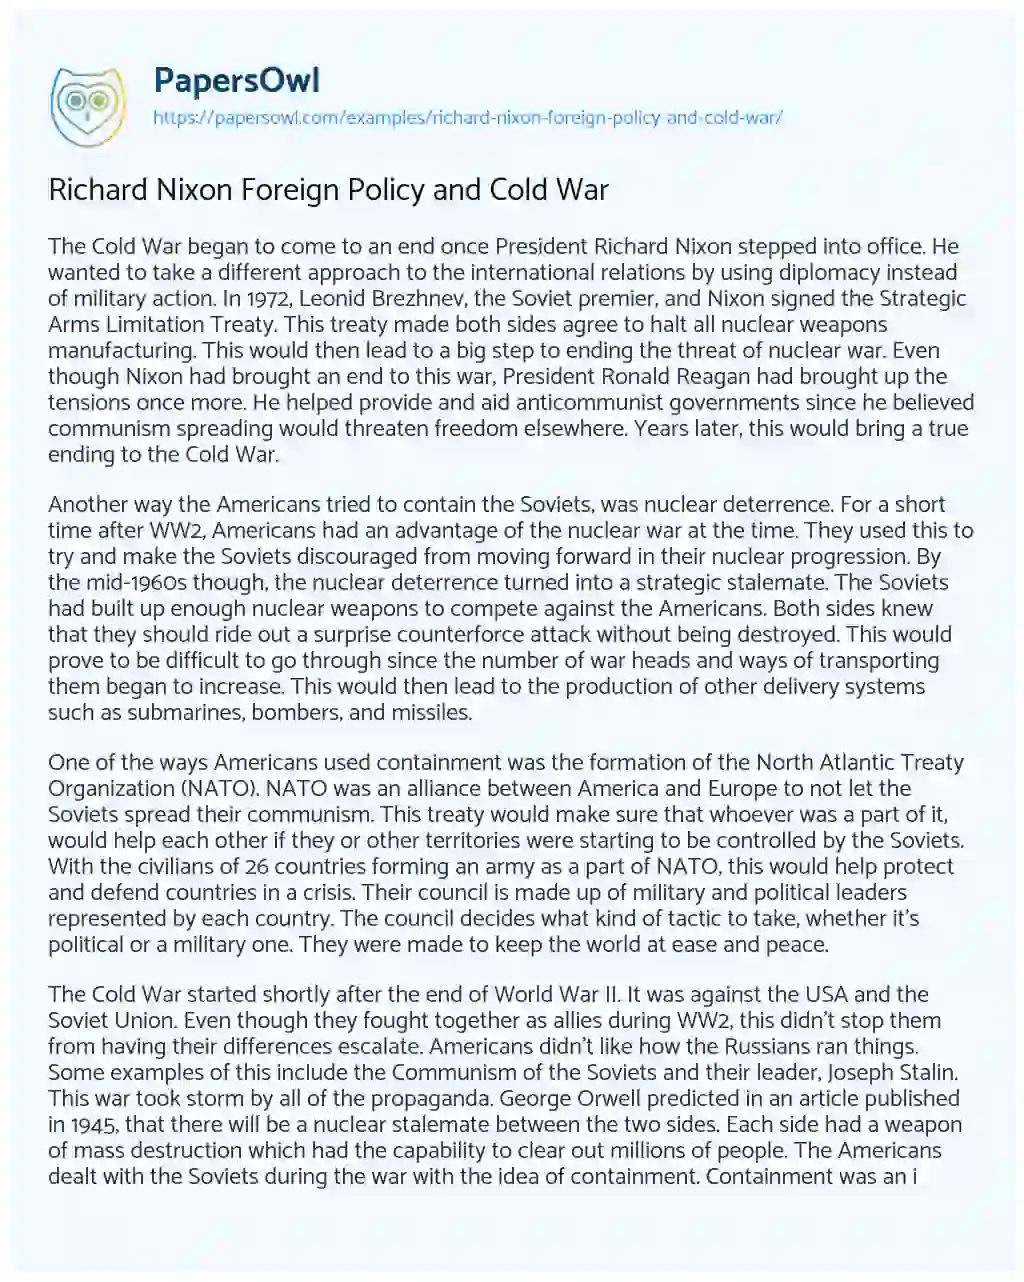 Essay on Richard Nixon Foreign Policy and Cold War